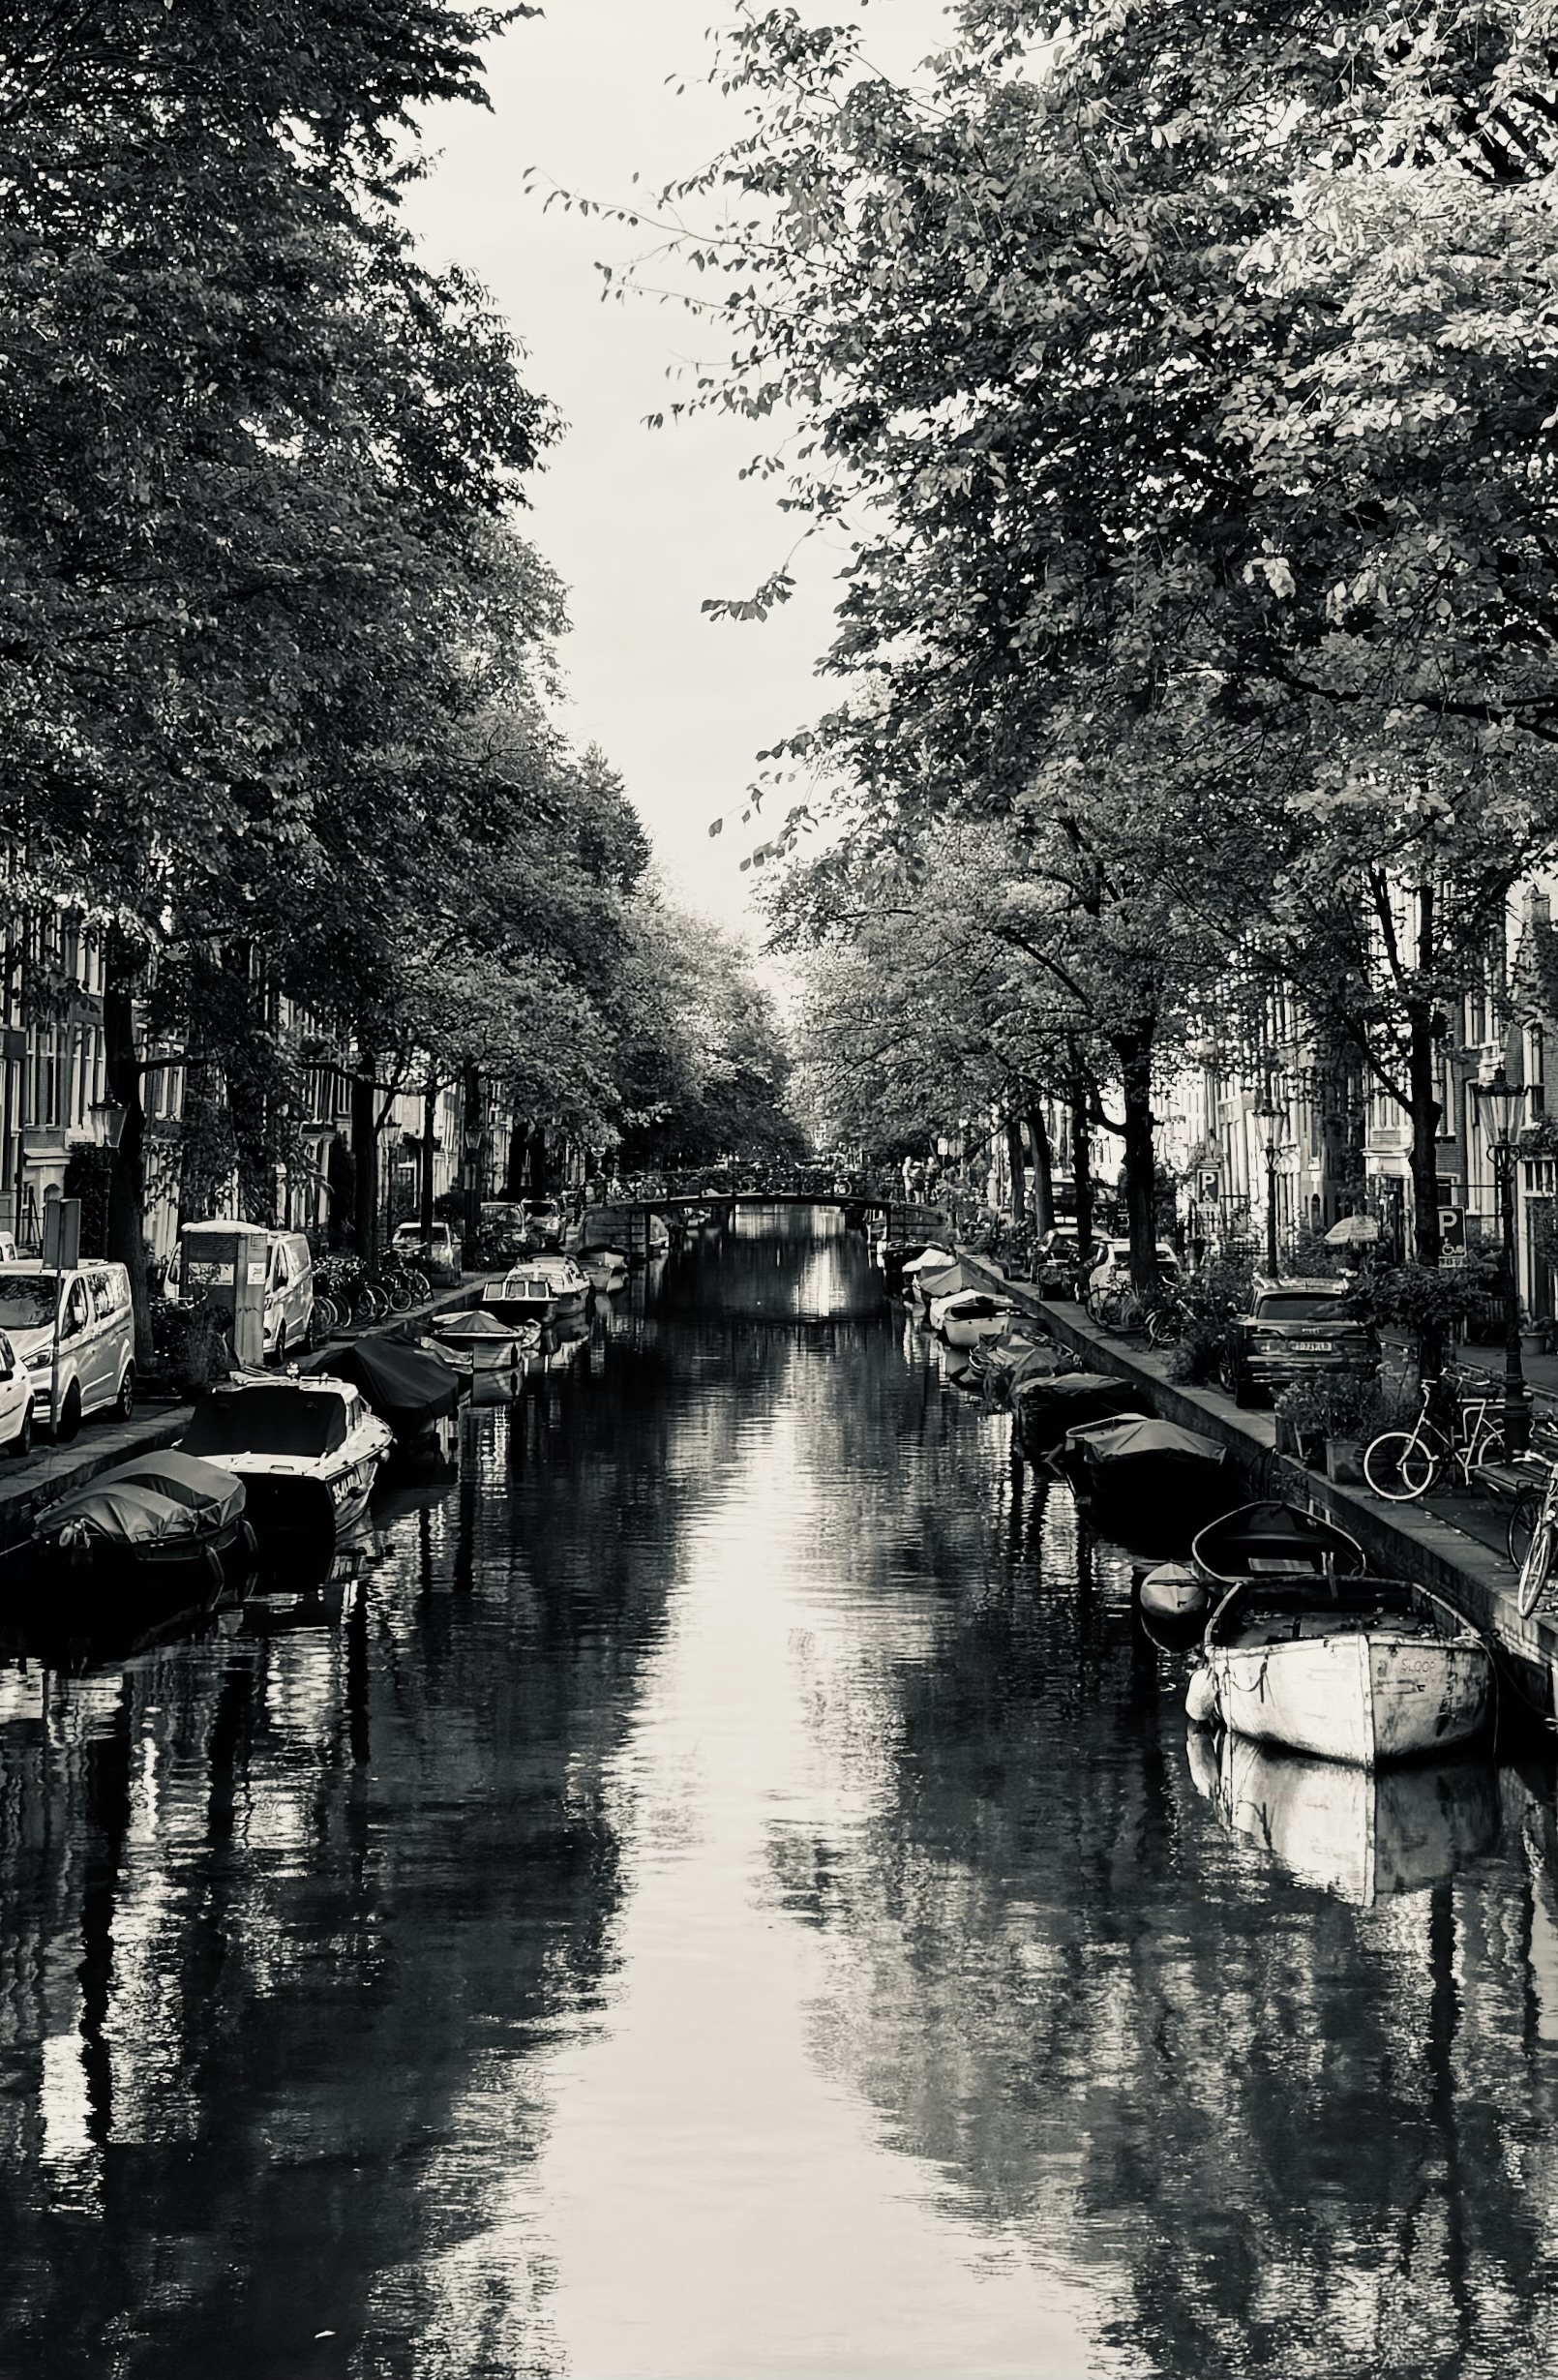 Looking down Egelantiersgracht in Amsterdam. Boats on either side of the canal with trees above.